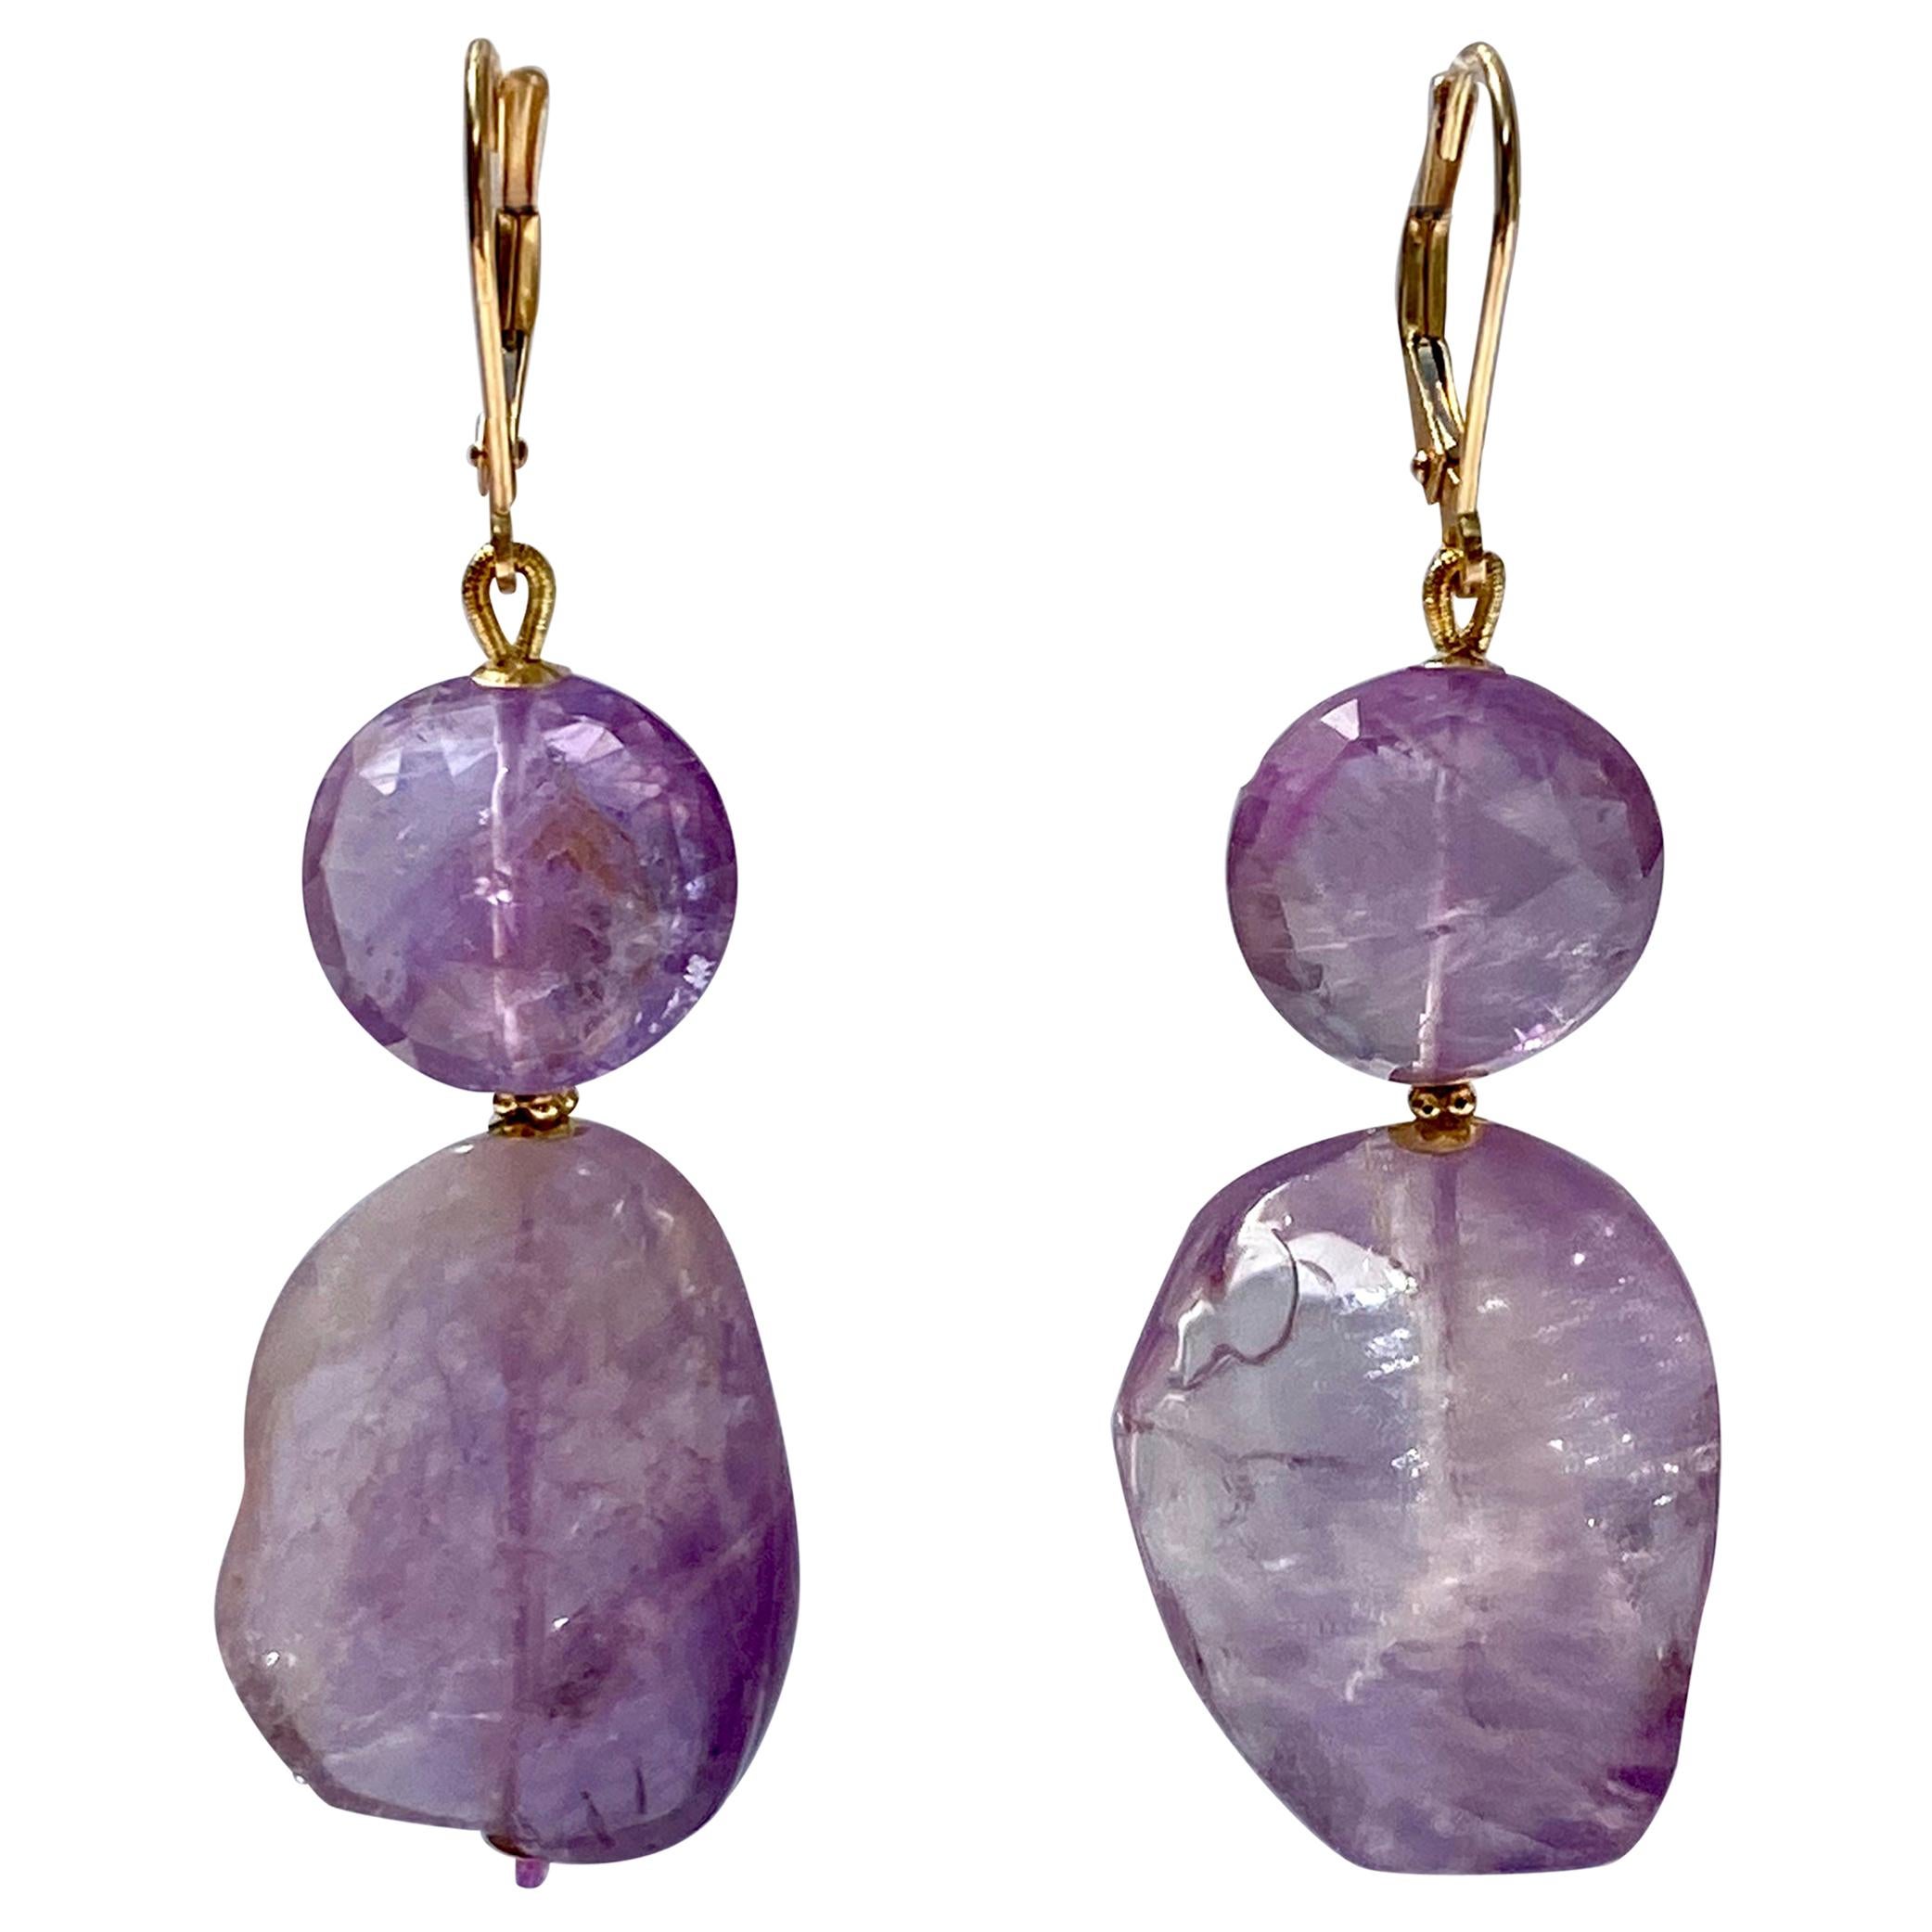 Marina J. Double Amethyst Bead Earrings with 14 Karat Gold Lever-Back and Beads For Sale